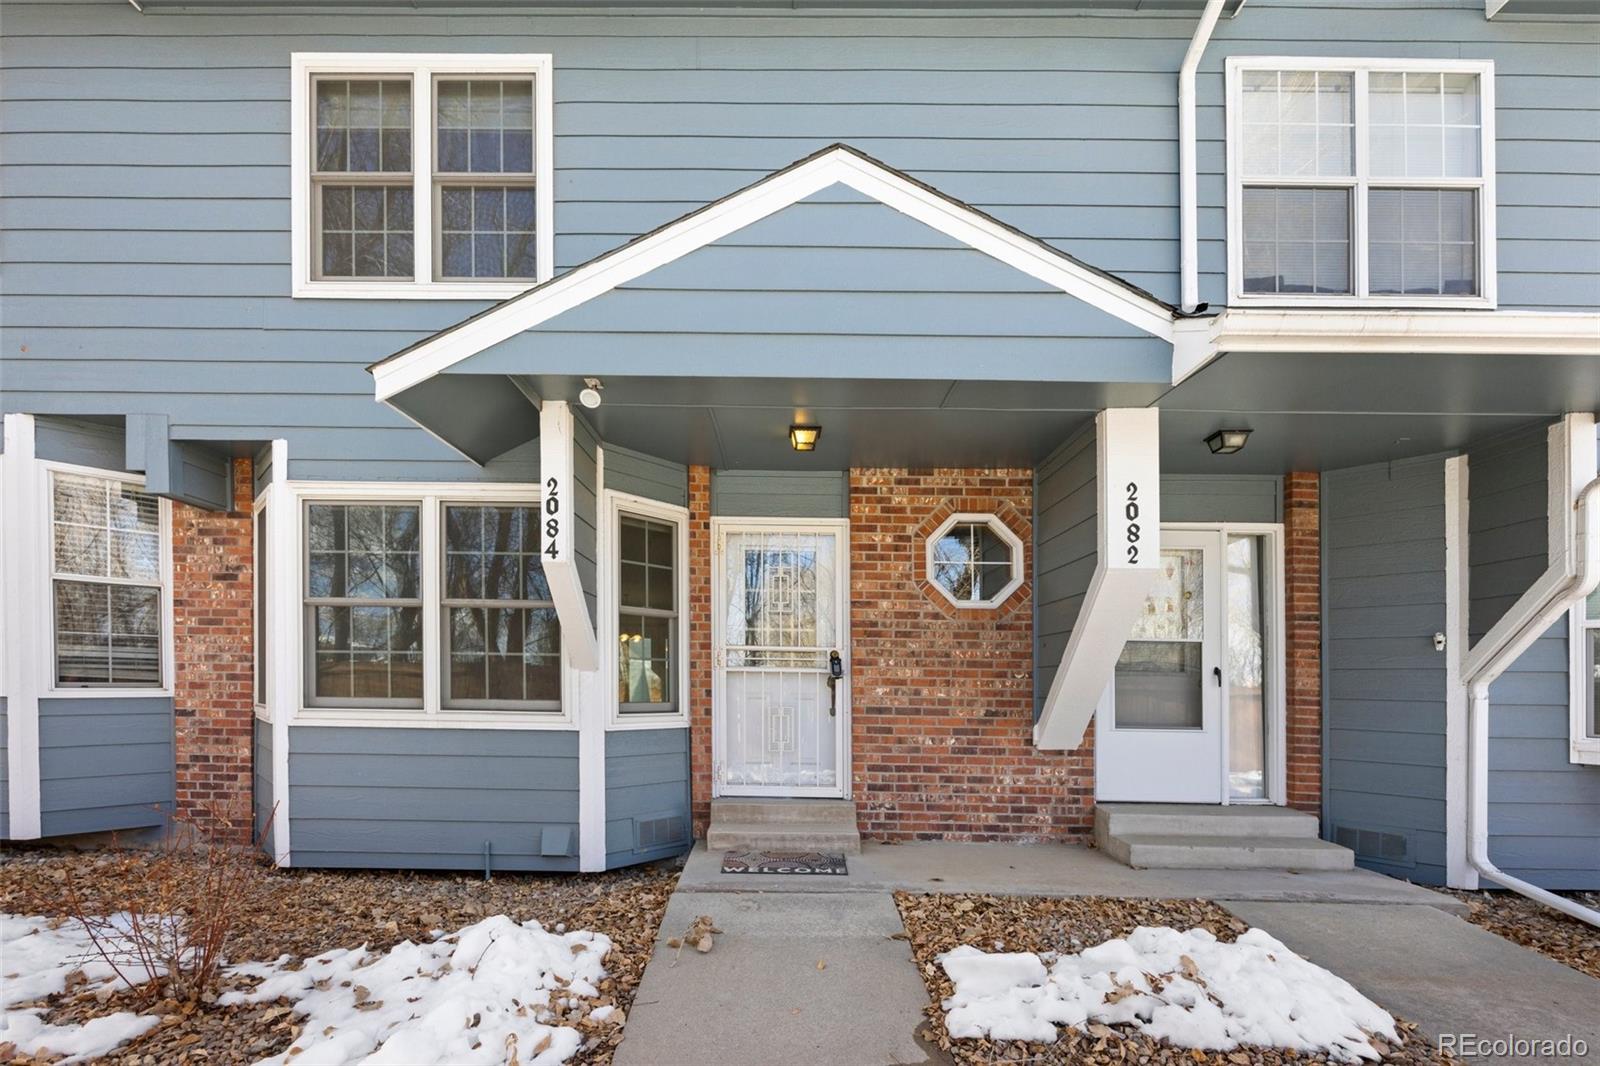 Report Image for 2084 S Balsam Street,Lakewood, Colorado